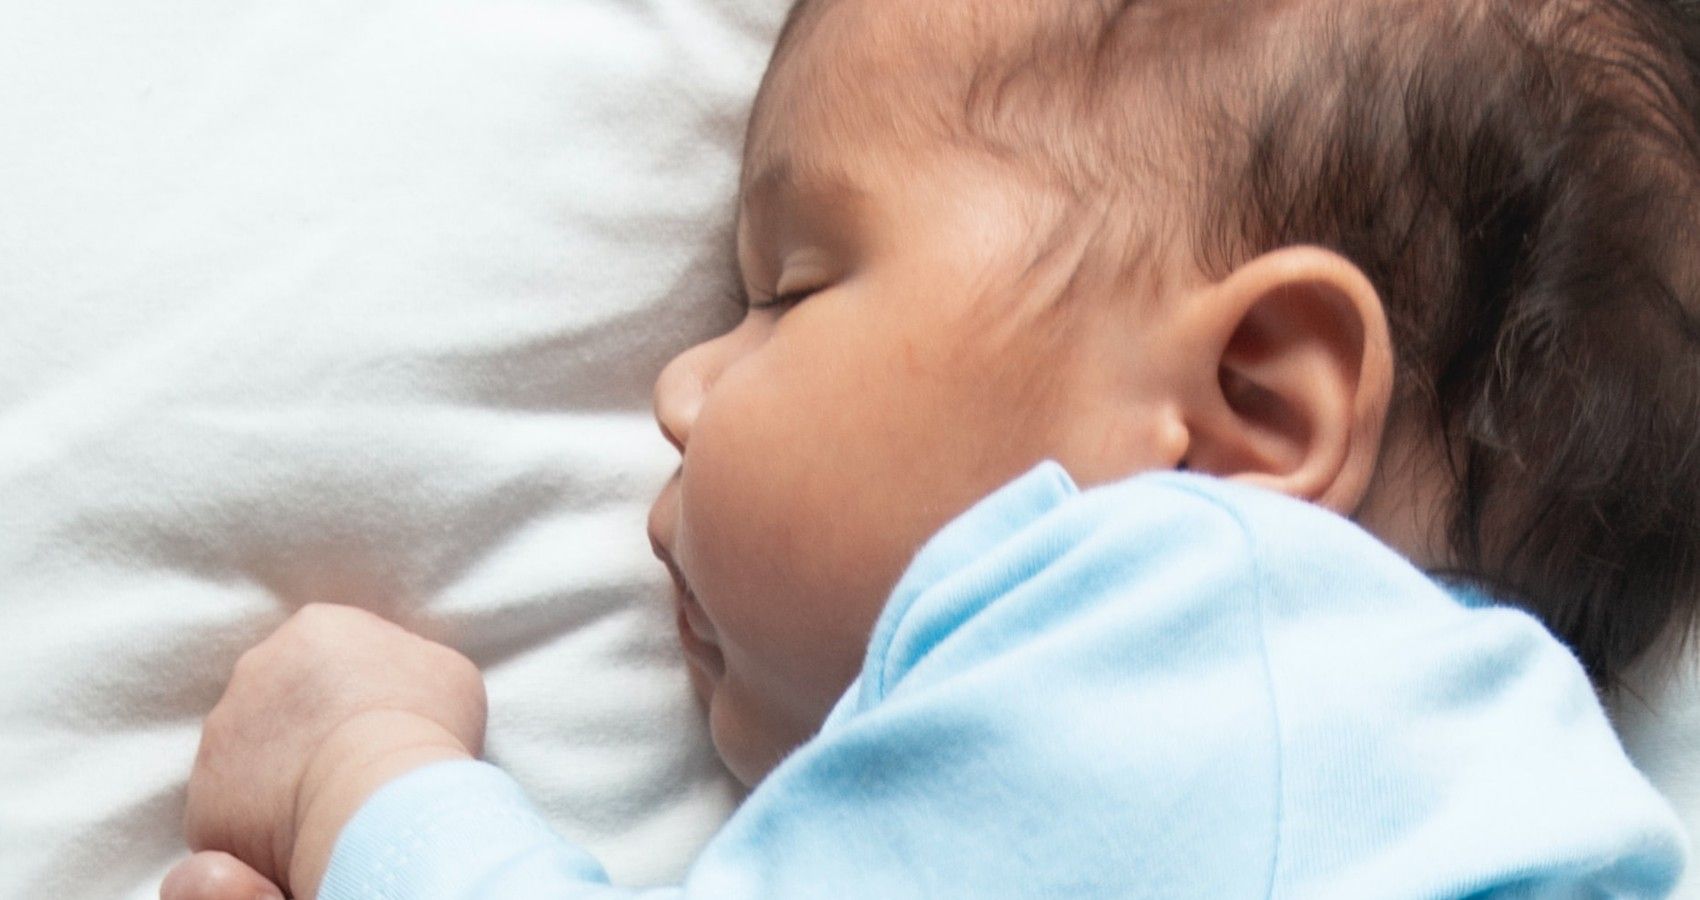 Babies Without Diapers Do Not Get Enough Sleep, Study Finds